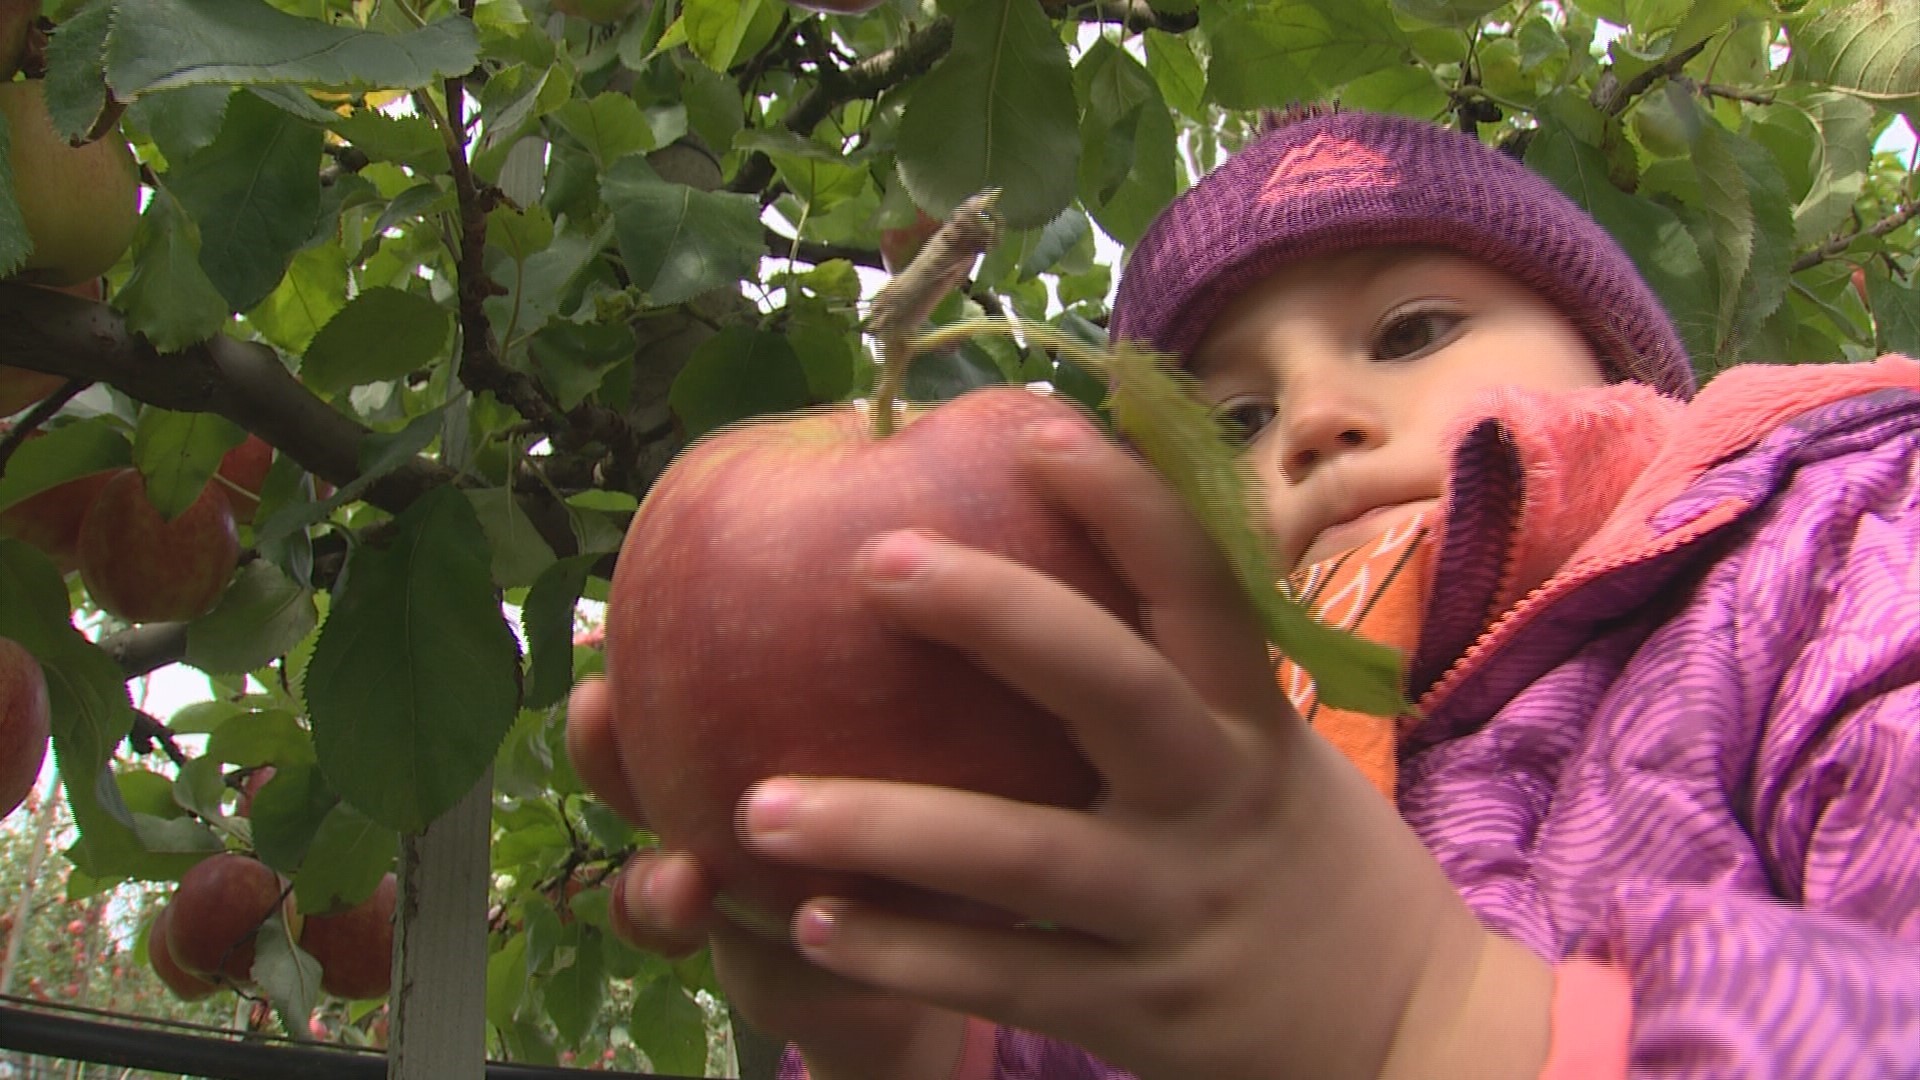 Apples are just the beginning in the largest orchard west of the mountains. Sponsored by Visit Bellingham.